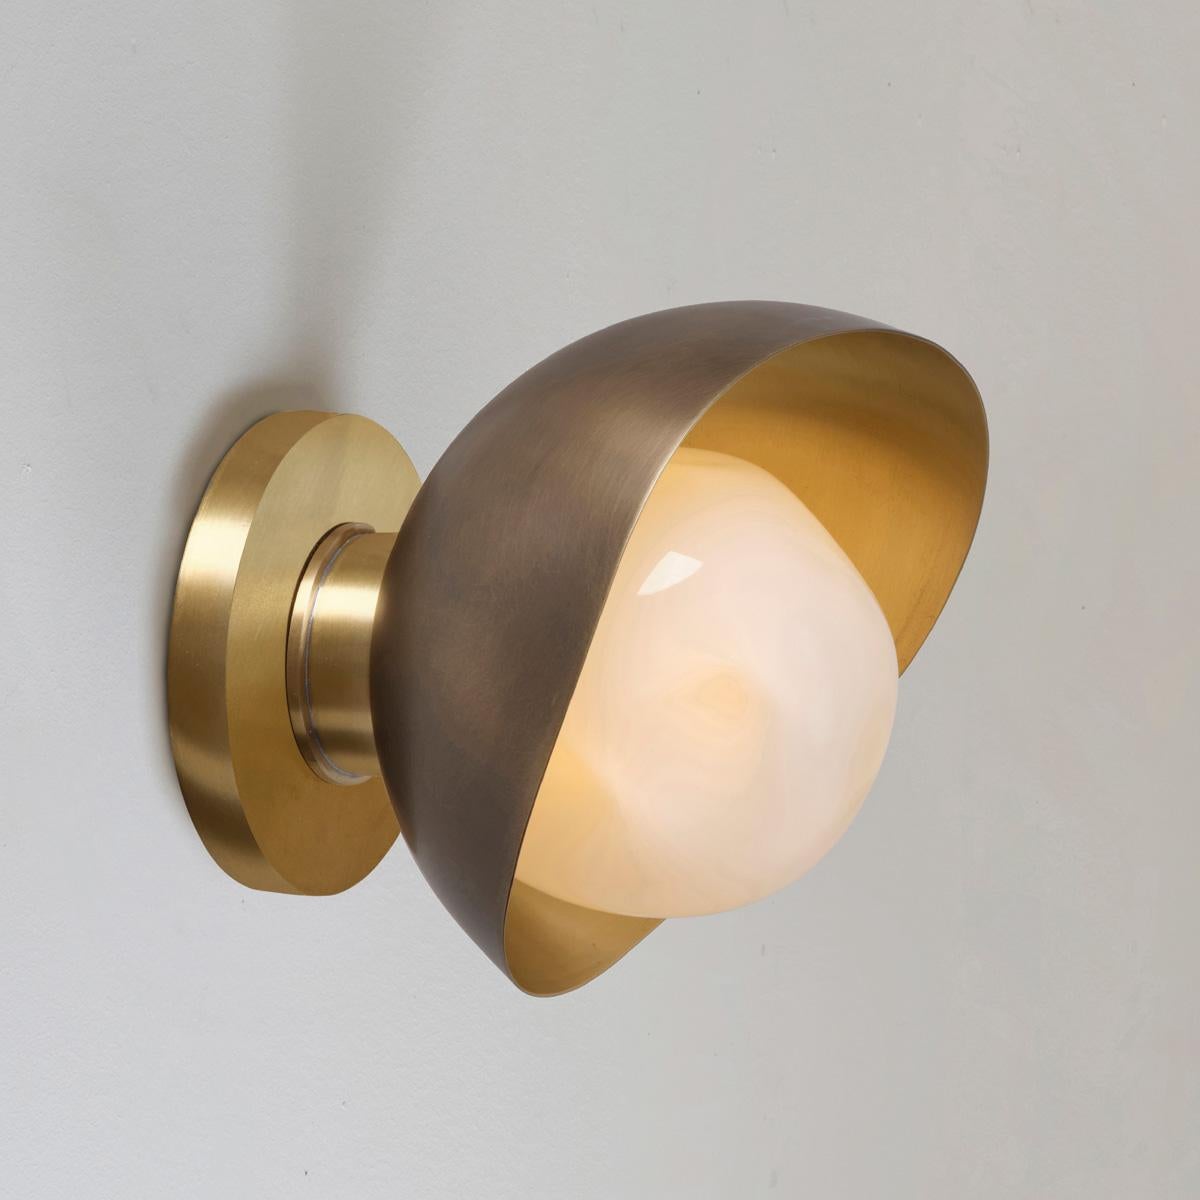 Perla Mini Wall Light by Gaspare Asaro. Sand White and Satin Brass Finish For Sale 2